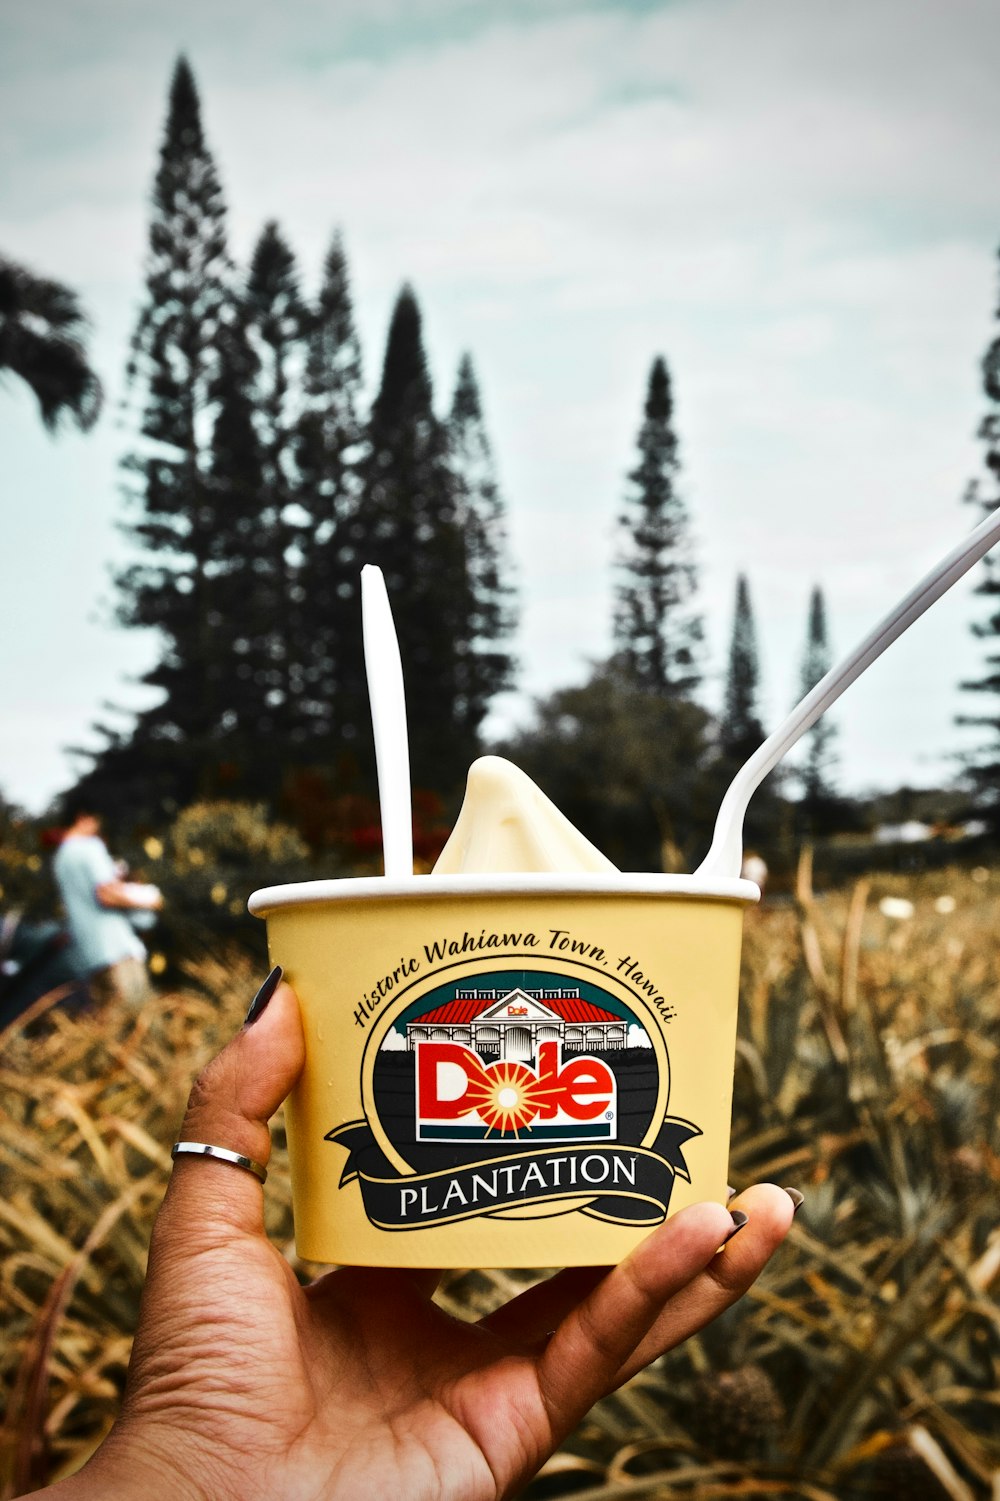 person holding Dole Plantation ice cream cup